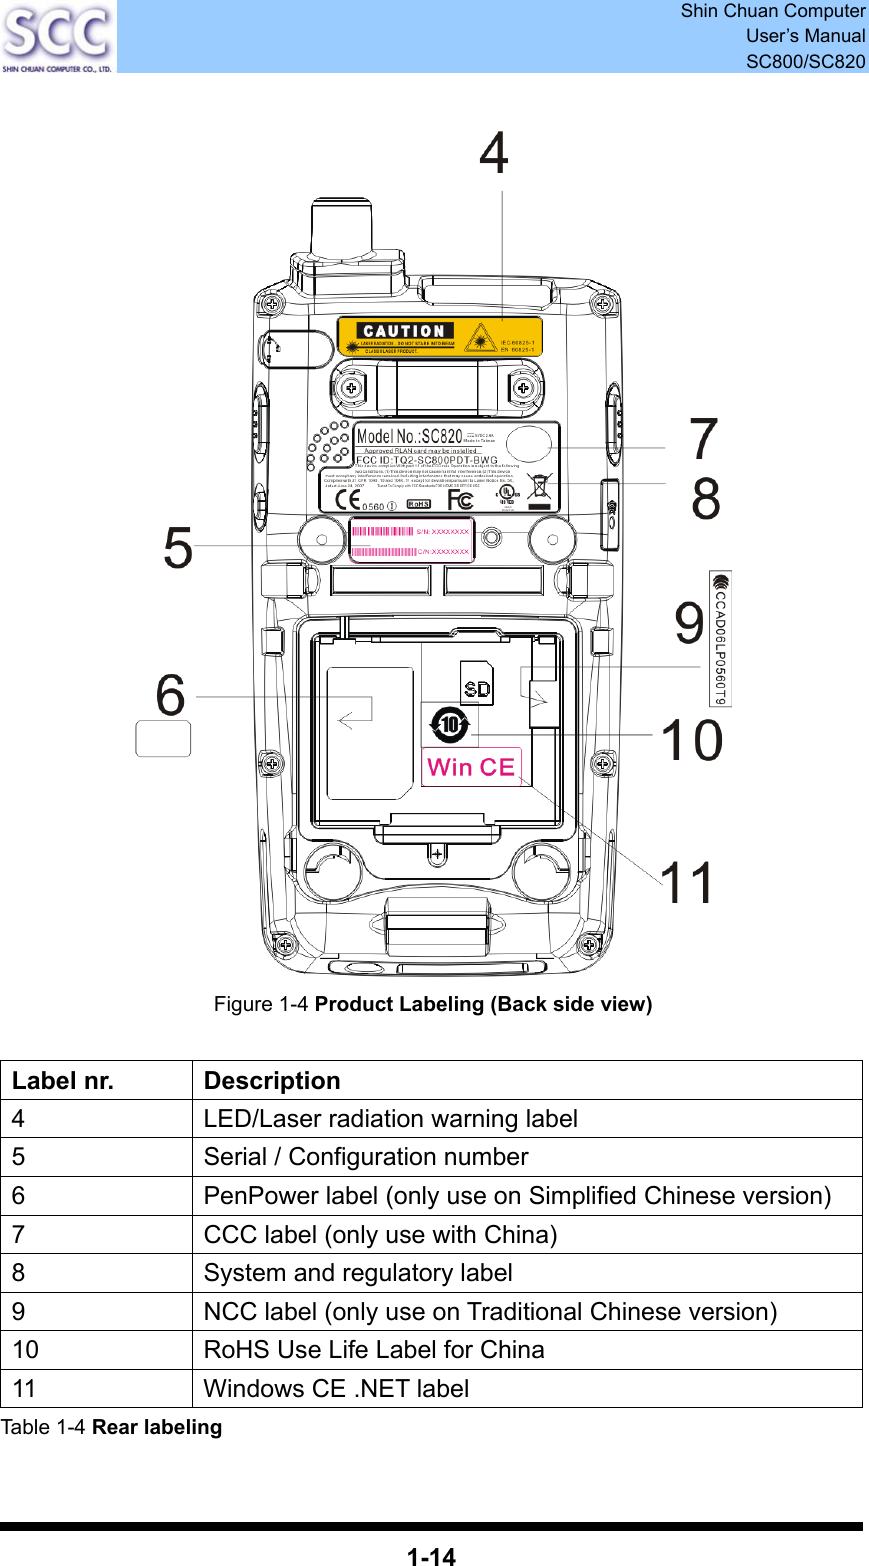  Shin Chuan Computer User’s Manual SC800/SC820  1-14   Figure 1-4 Product Labeling (Back side view)  Label nr.  Description 4  LED/Laser radiation warning label 5  Serial / Configuration number 6  PenPower label (only use on Simplified Chinese version) 7  CCC label (only use with China) 8  System and regulatory label 9  NCC label (only use on Traditional Chinese version) 10  RoHS Use Life Label for China 11  Windows CE .NET label Table 1-4 Rear labeling  